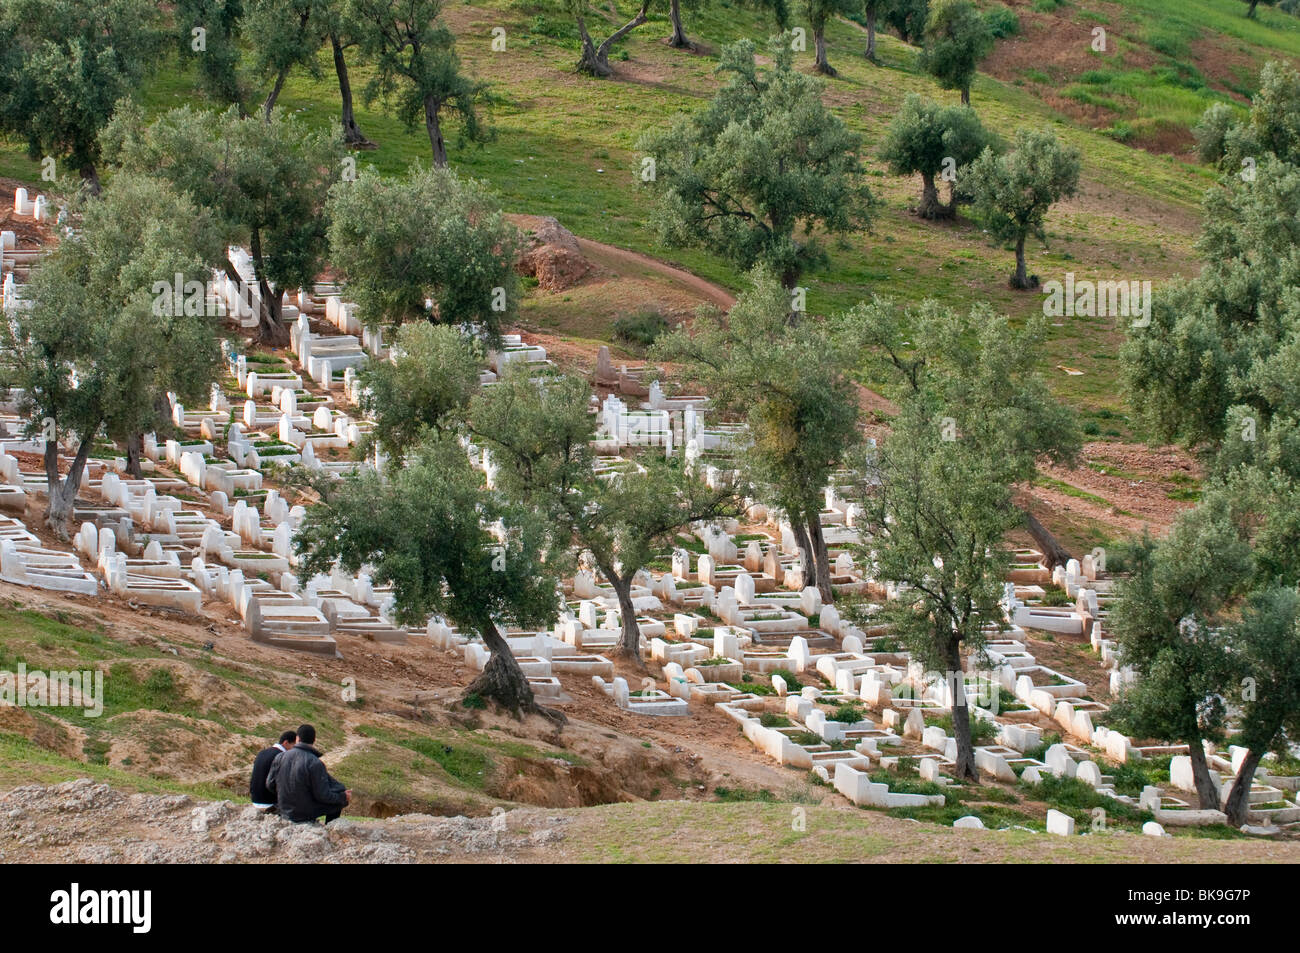 Cemetery in Fes, Morocco Stock Photo